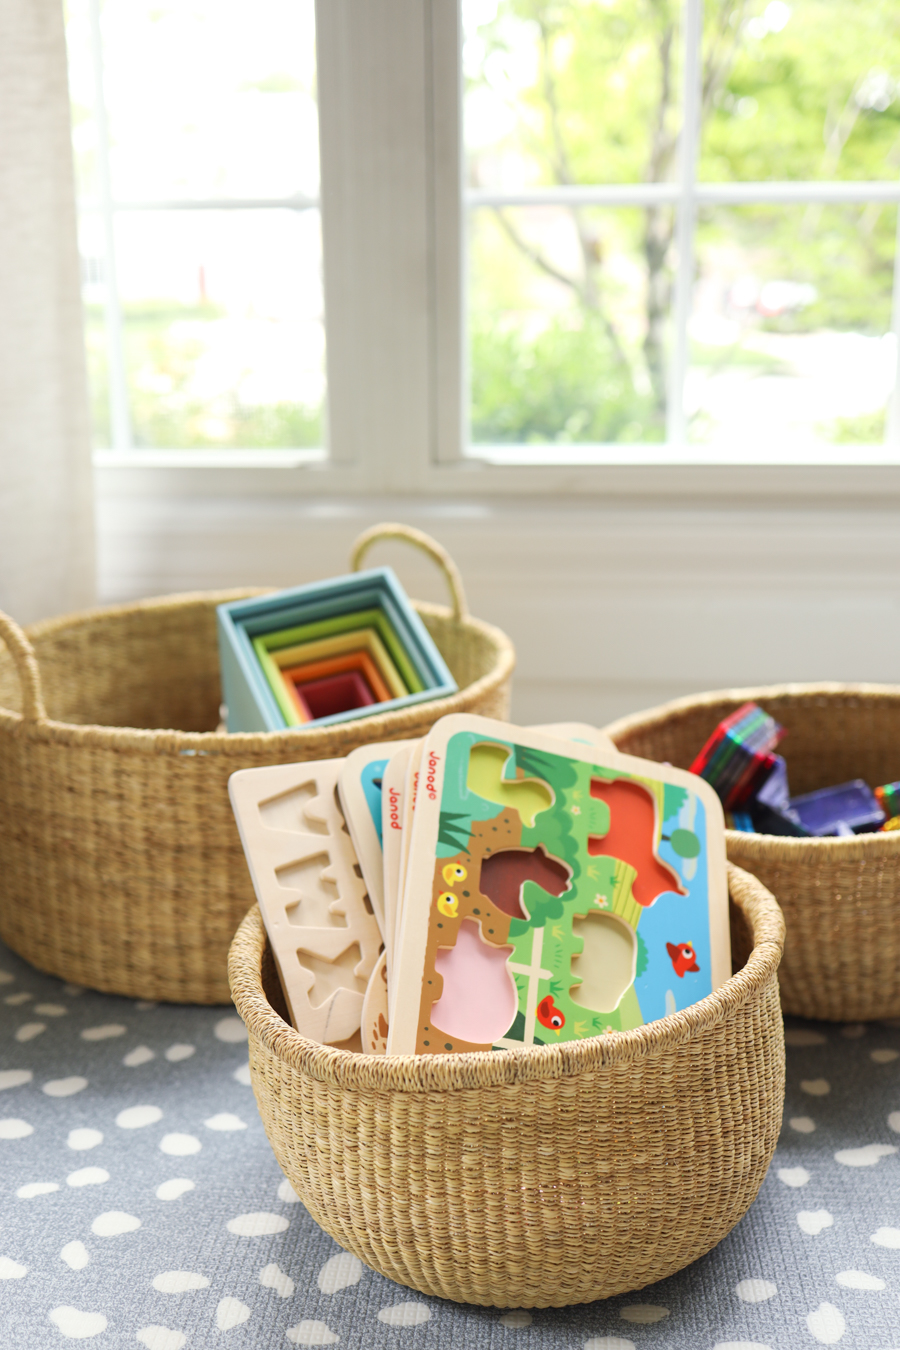 The Best Organizing Baskets For Any Room In Your Home - Organizing Moms